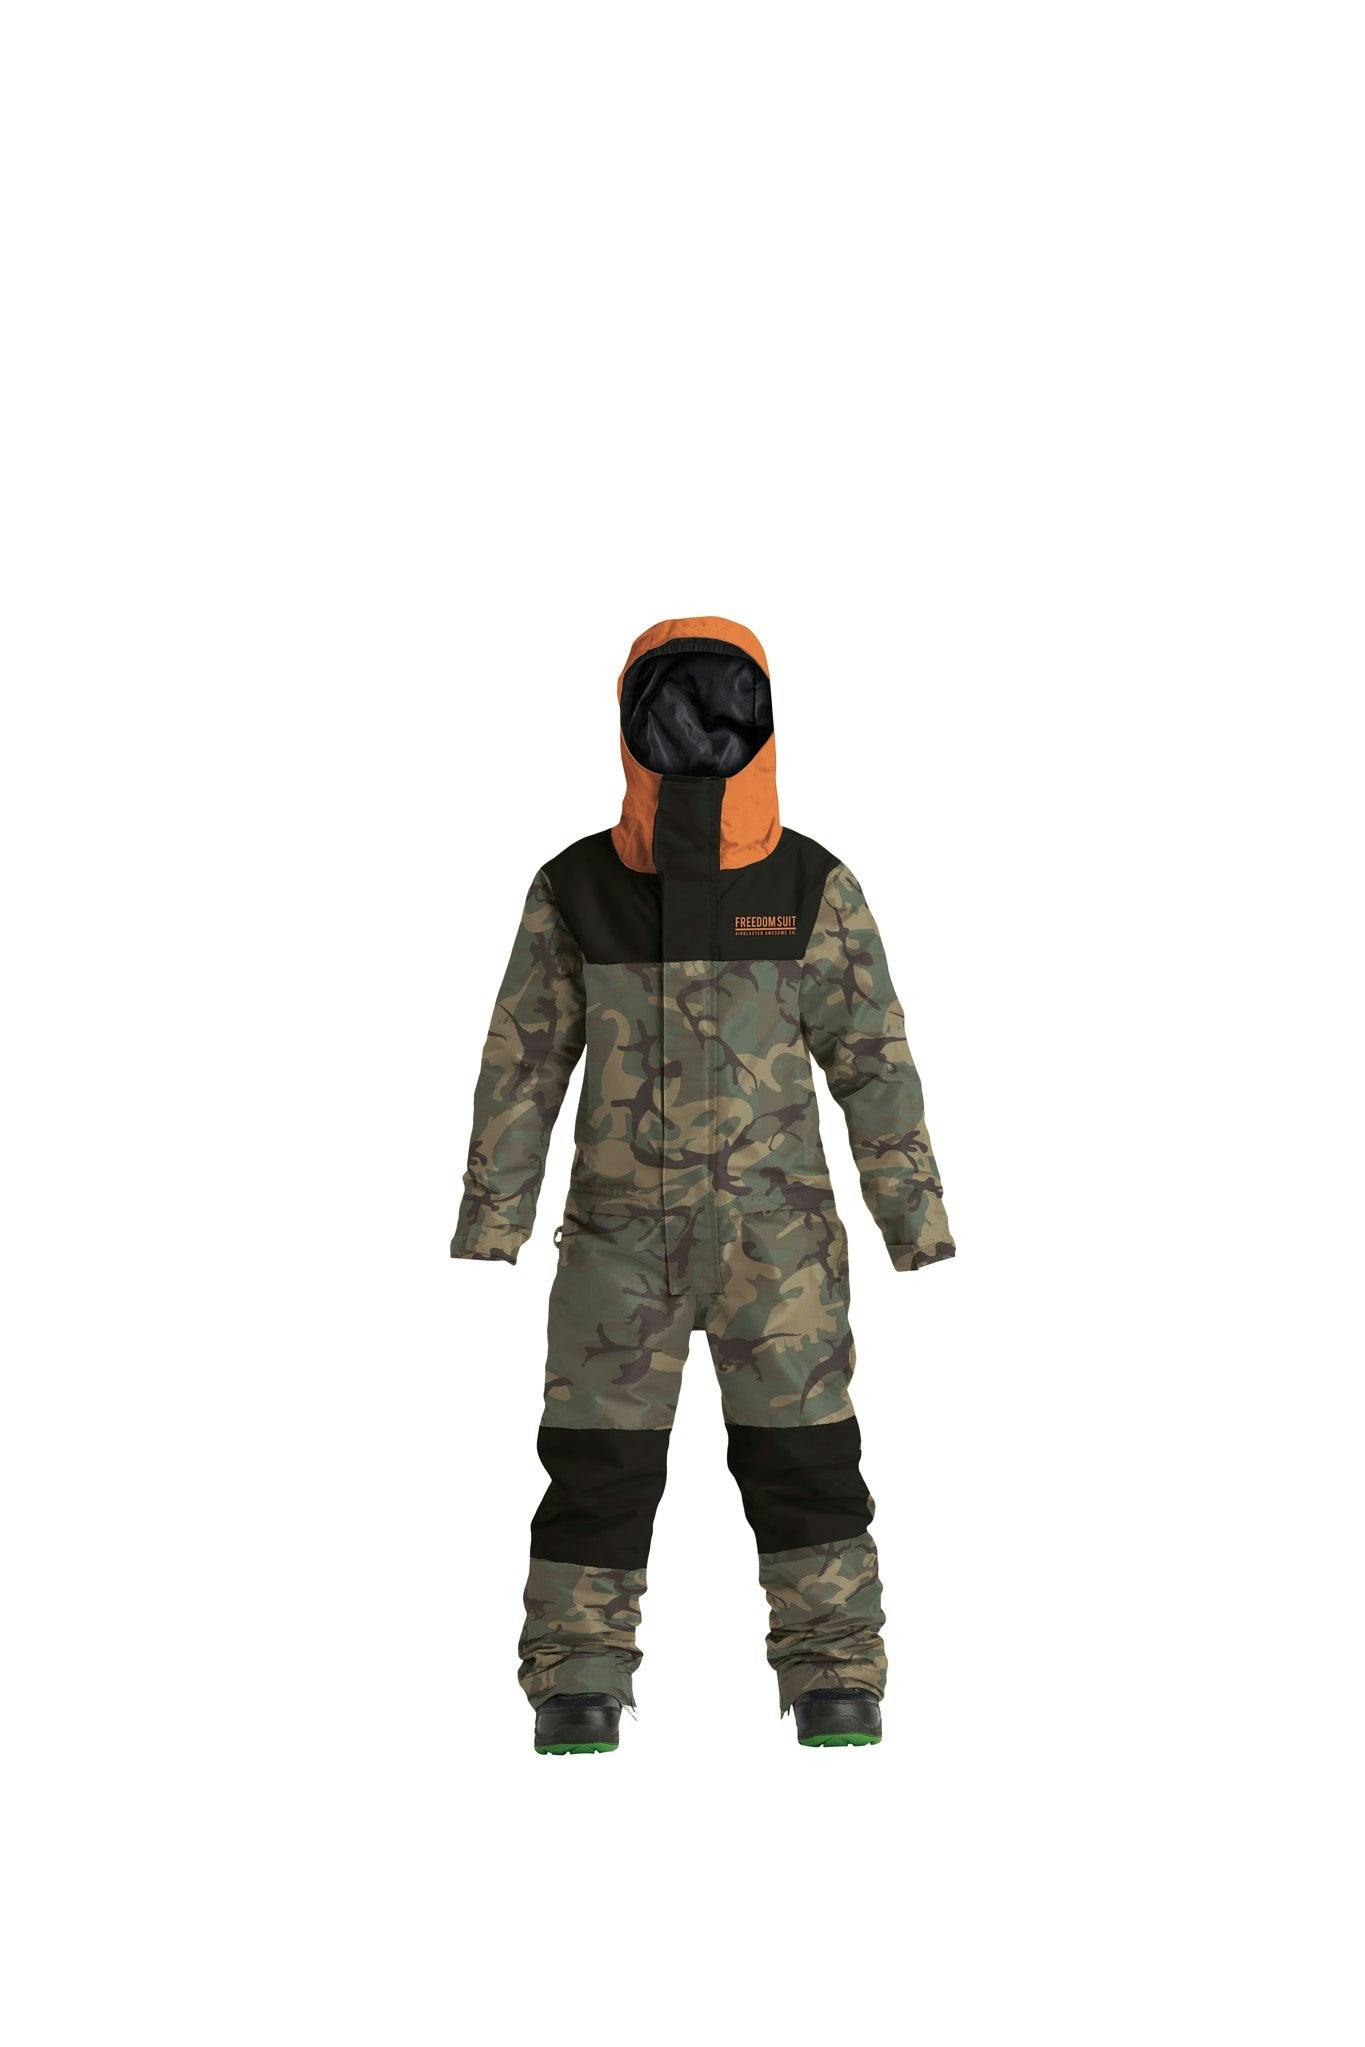 Airblaster Youth Freedom Suit